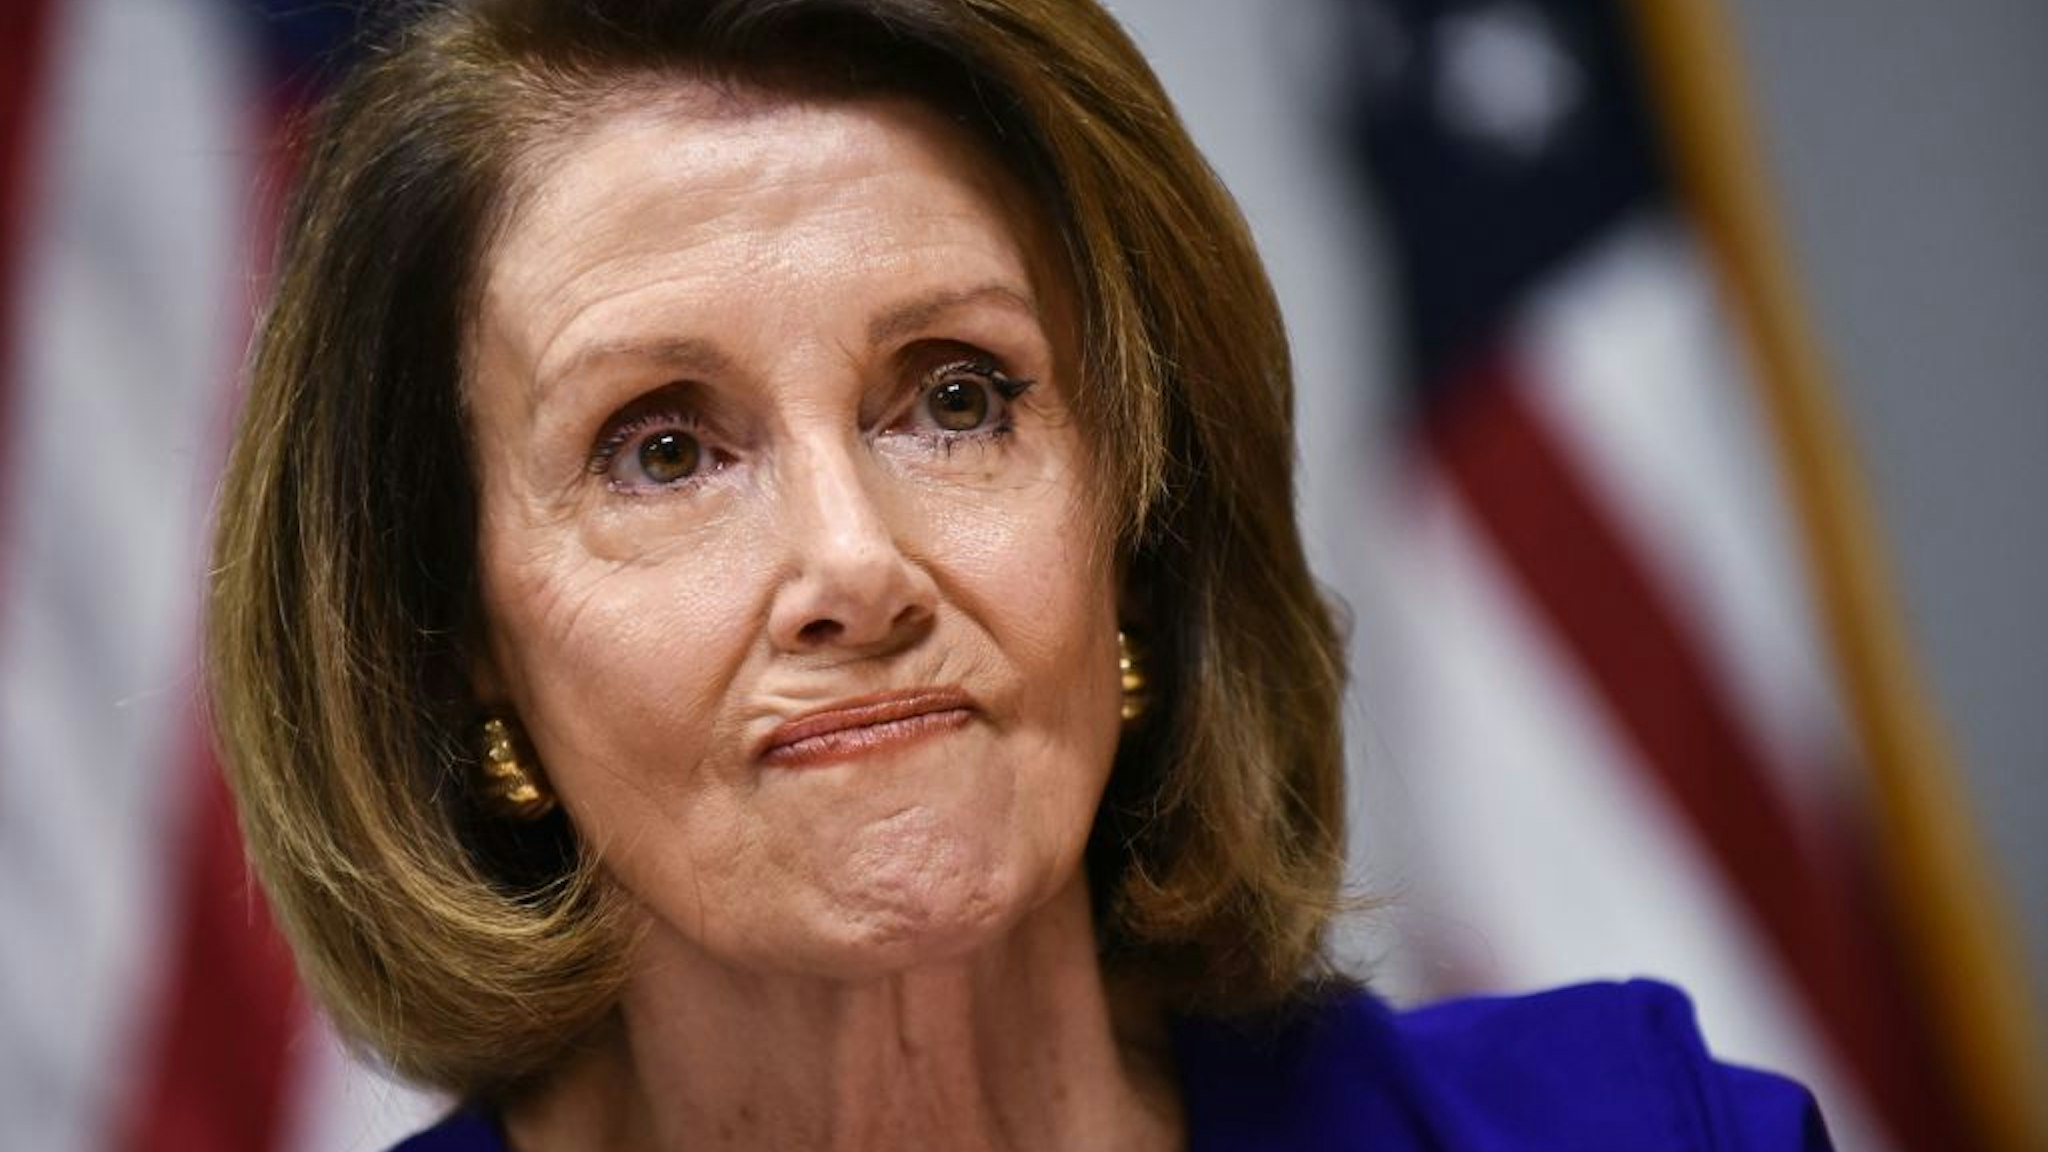 House minority leader Nancy Pelosi, D-CA, speaks during a press conference at Democratic National Committee headquarters in Washington, DC on November 6, 2018. -